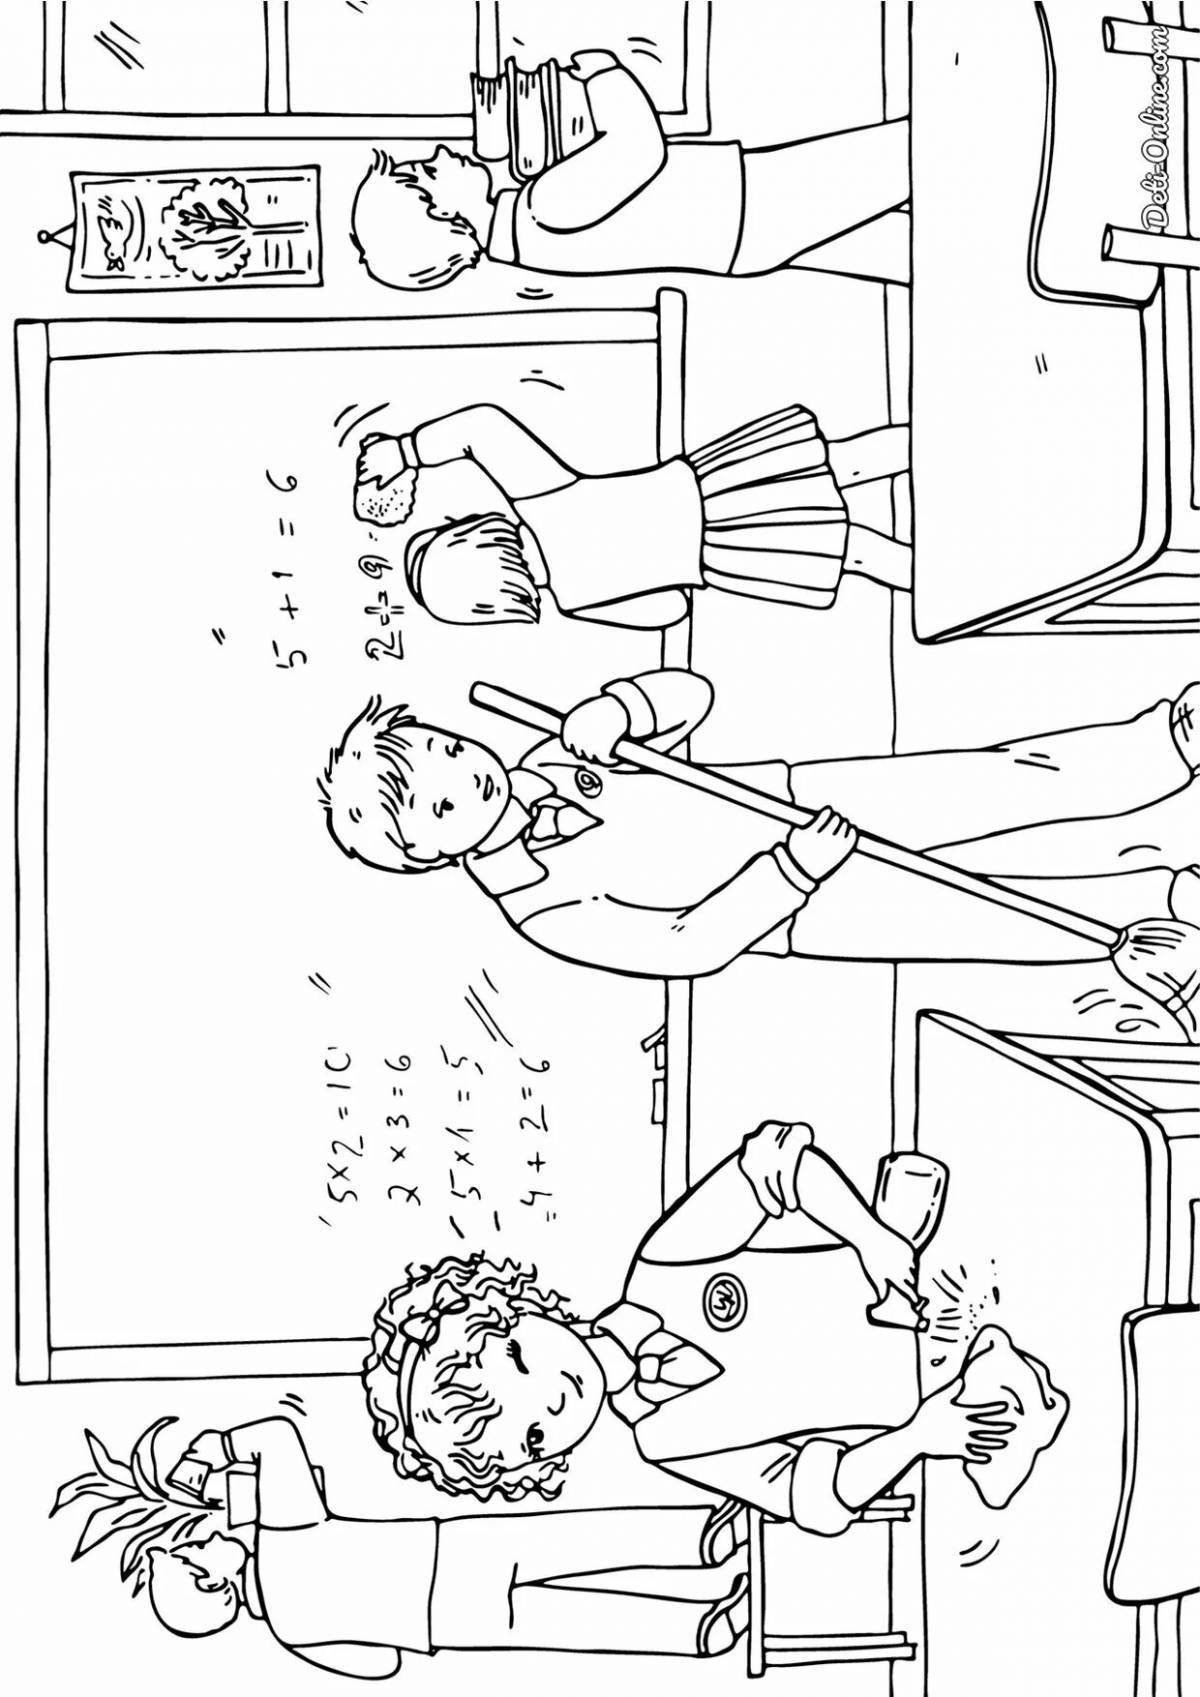 Magic school life coloring page